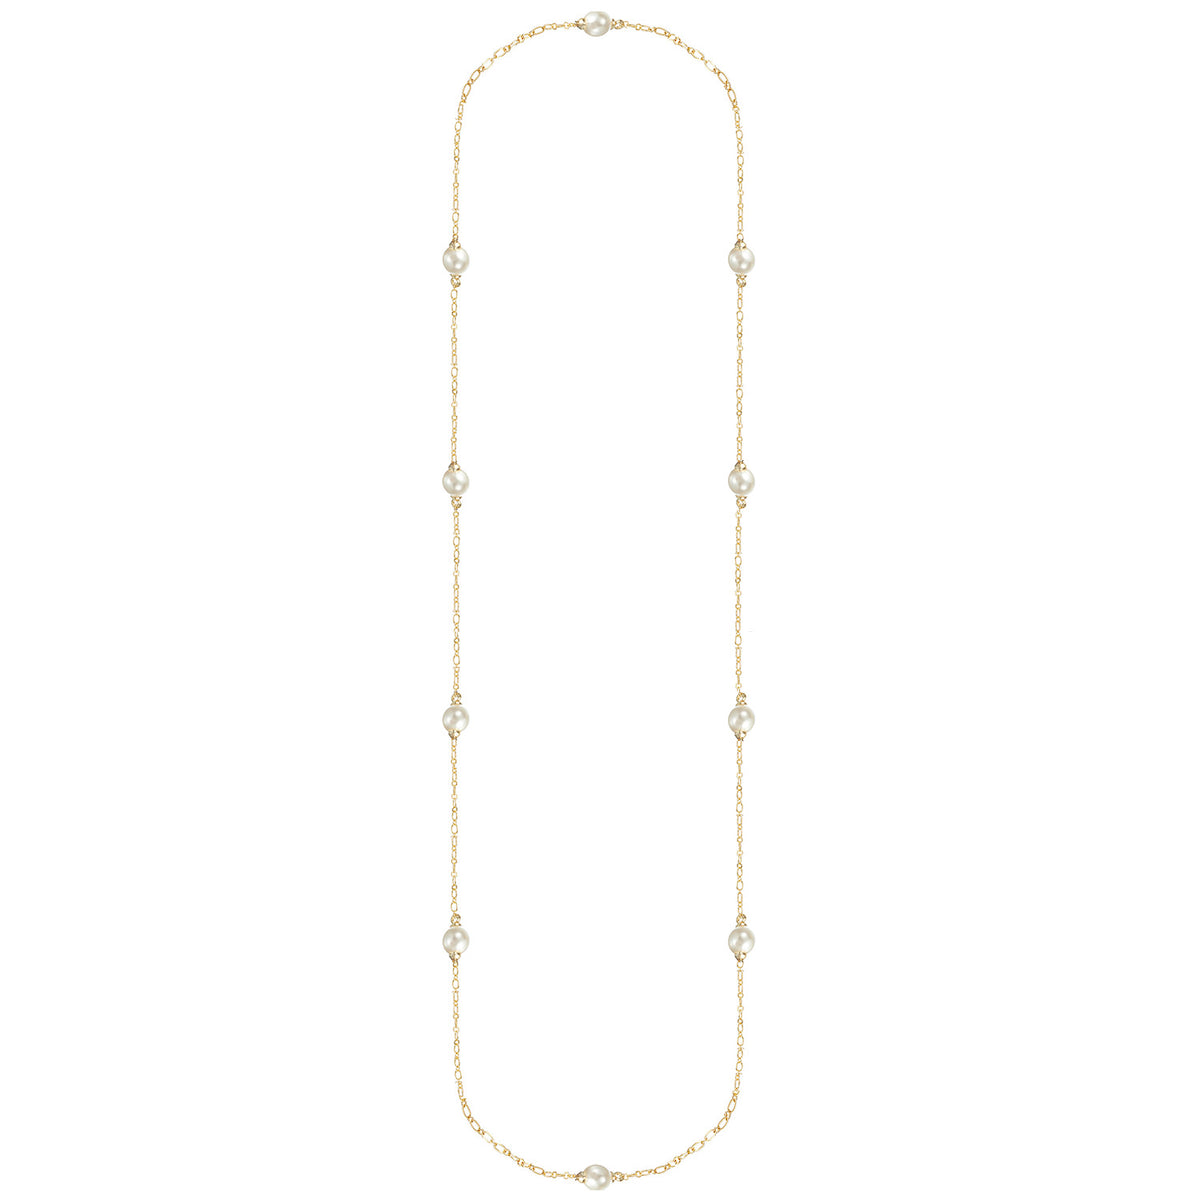 natalie wood designs adorned layering pearl necklace